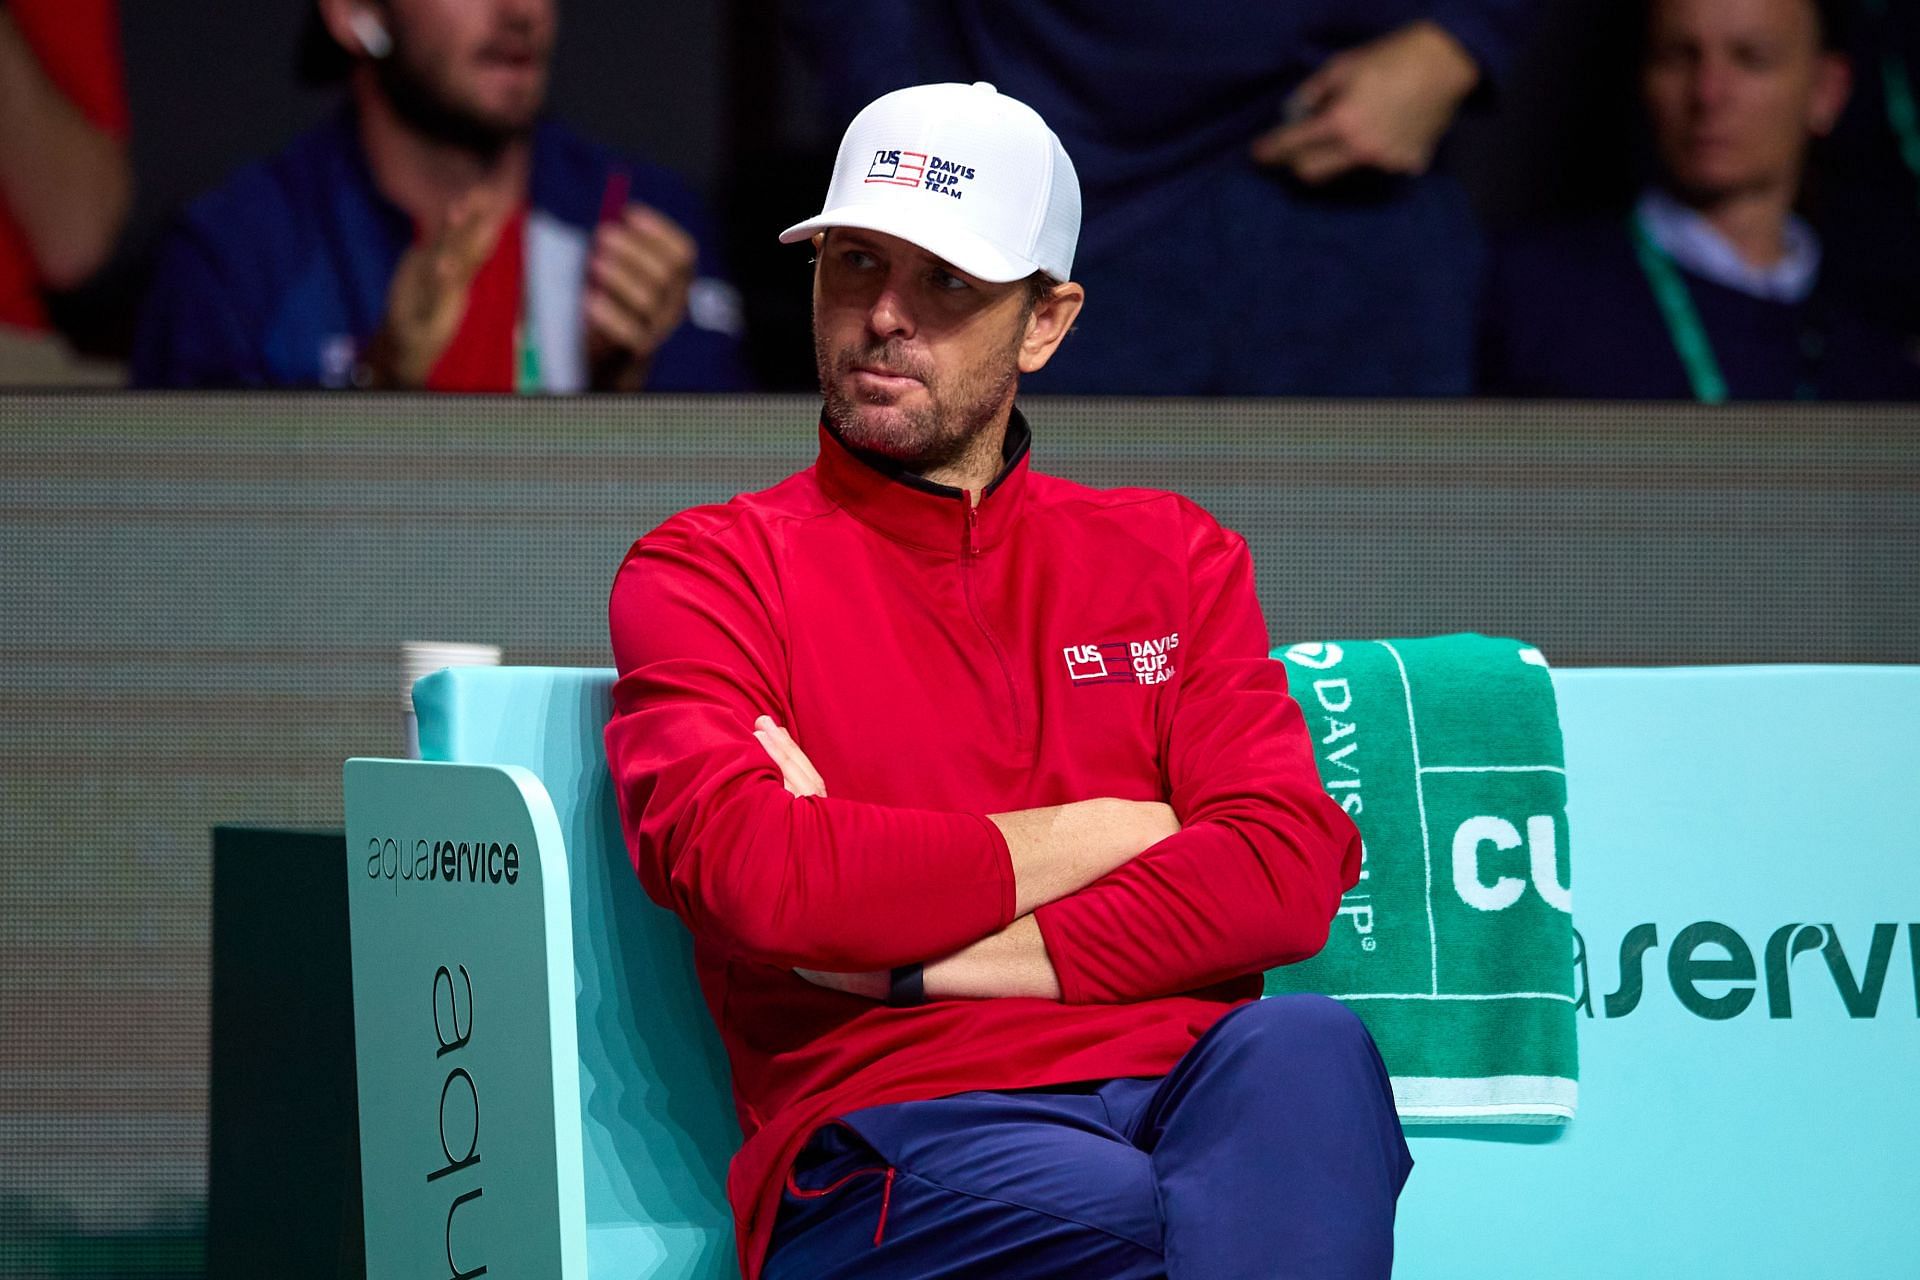 Mardy Fish was the captain of team US